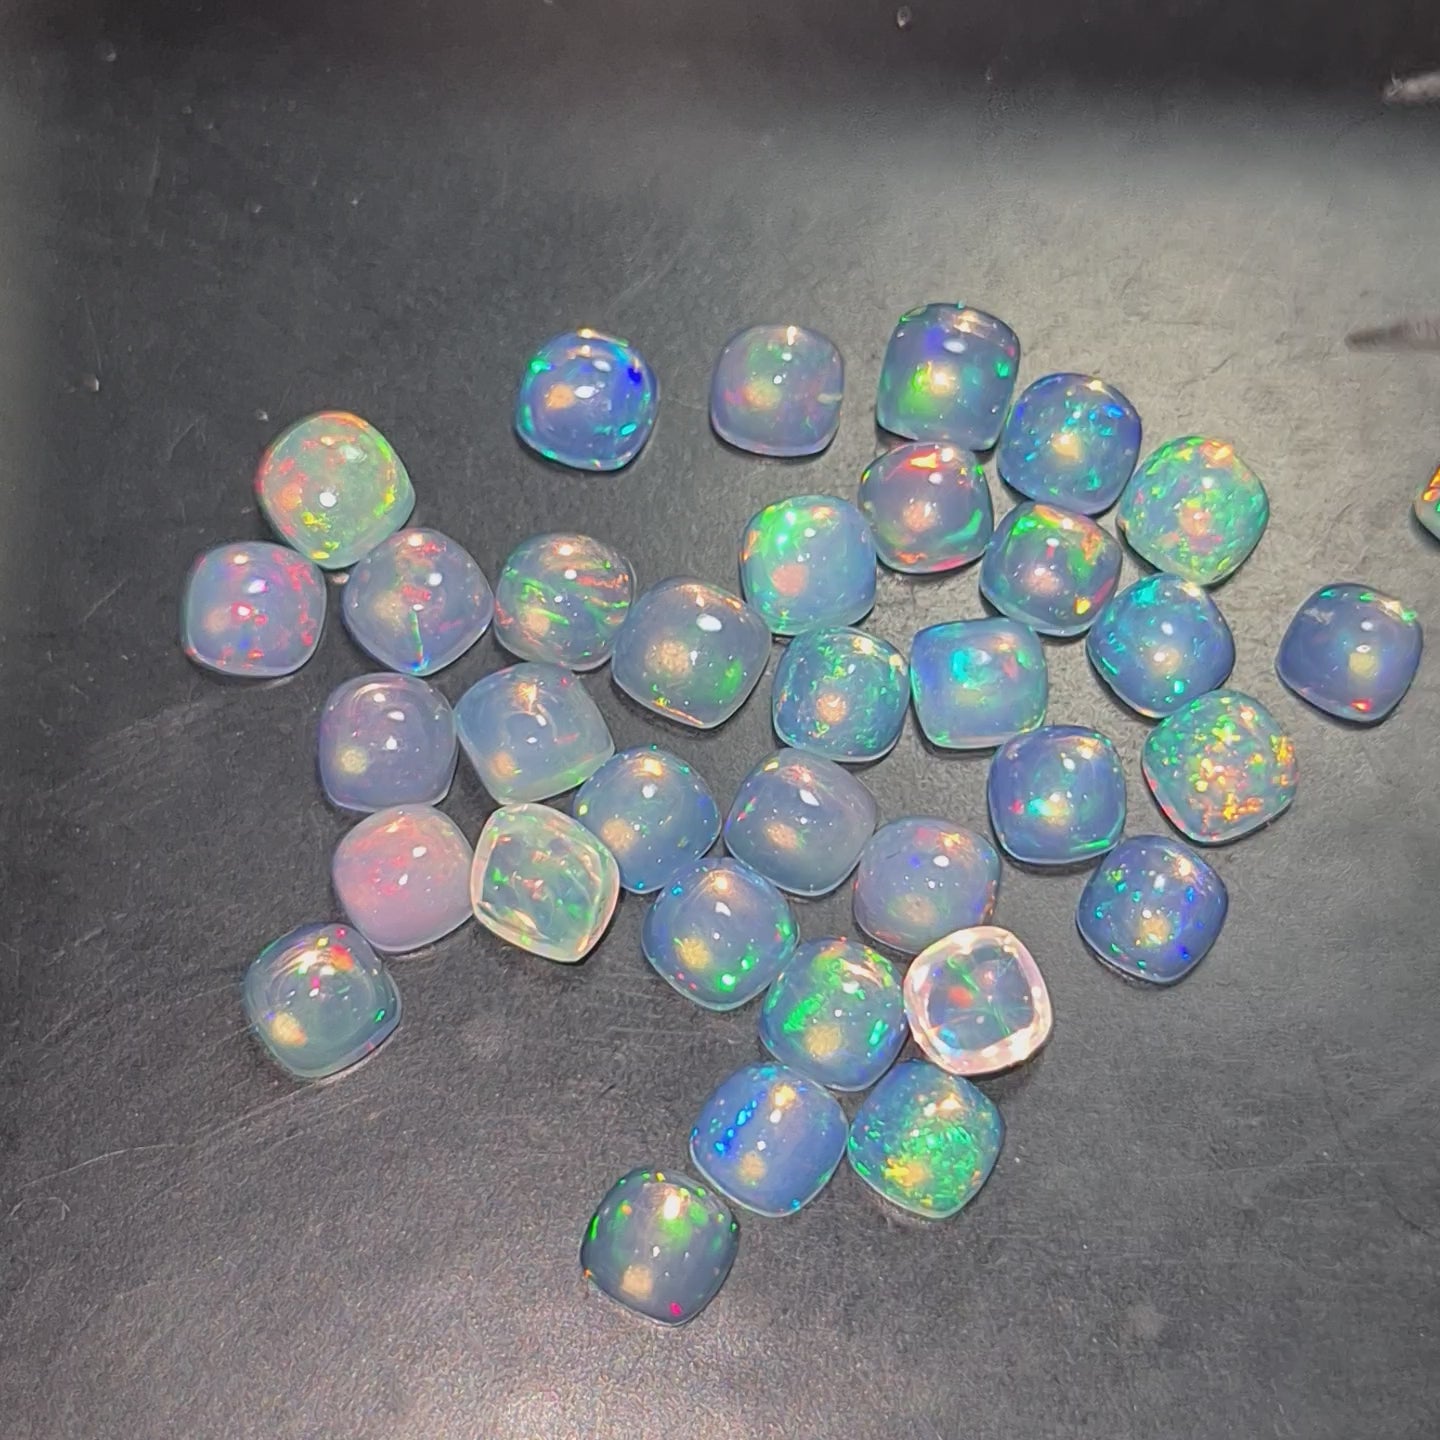 Wholesale Lot: 25 Pcs Natural Opal Cabochon 4mm |  | Ethiopian Mined Untreated